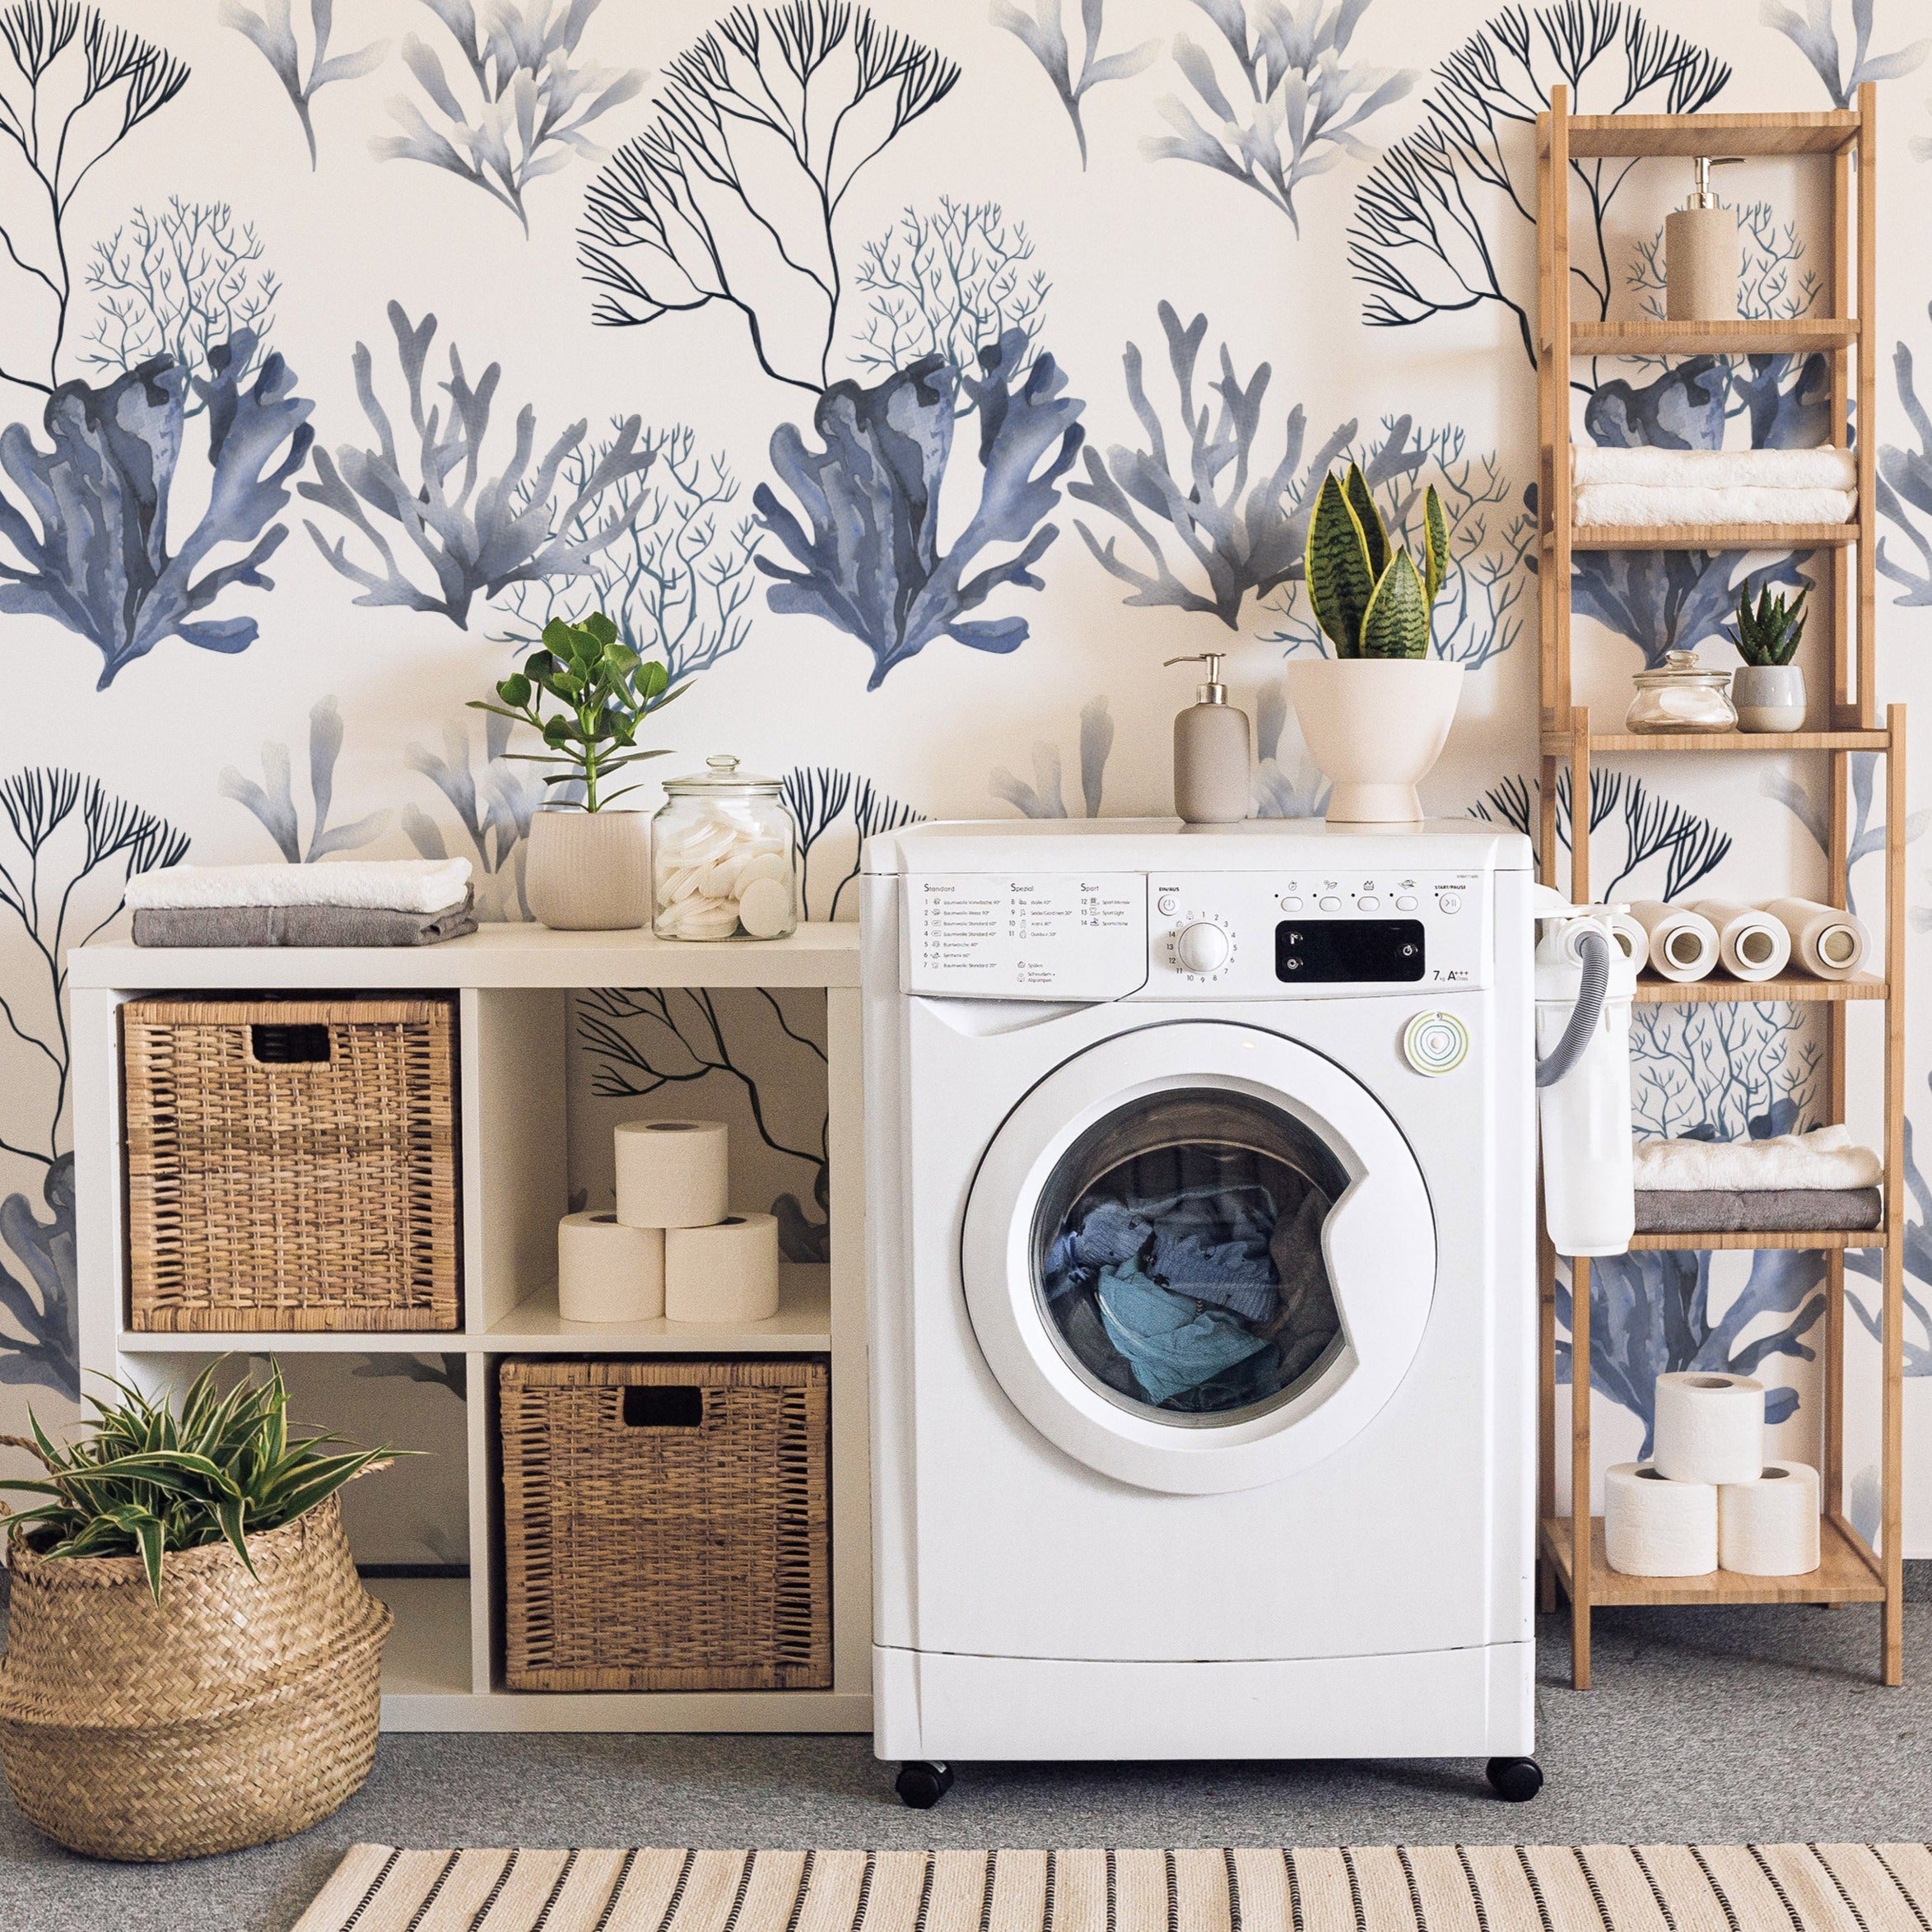 Modern laundry room decorated with ocean coral wallpaper featuring blue and white coral designs